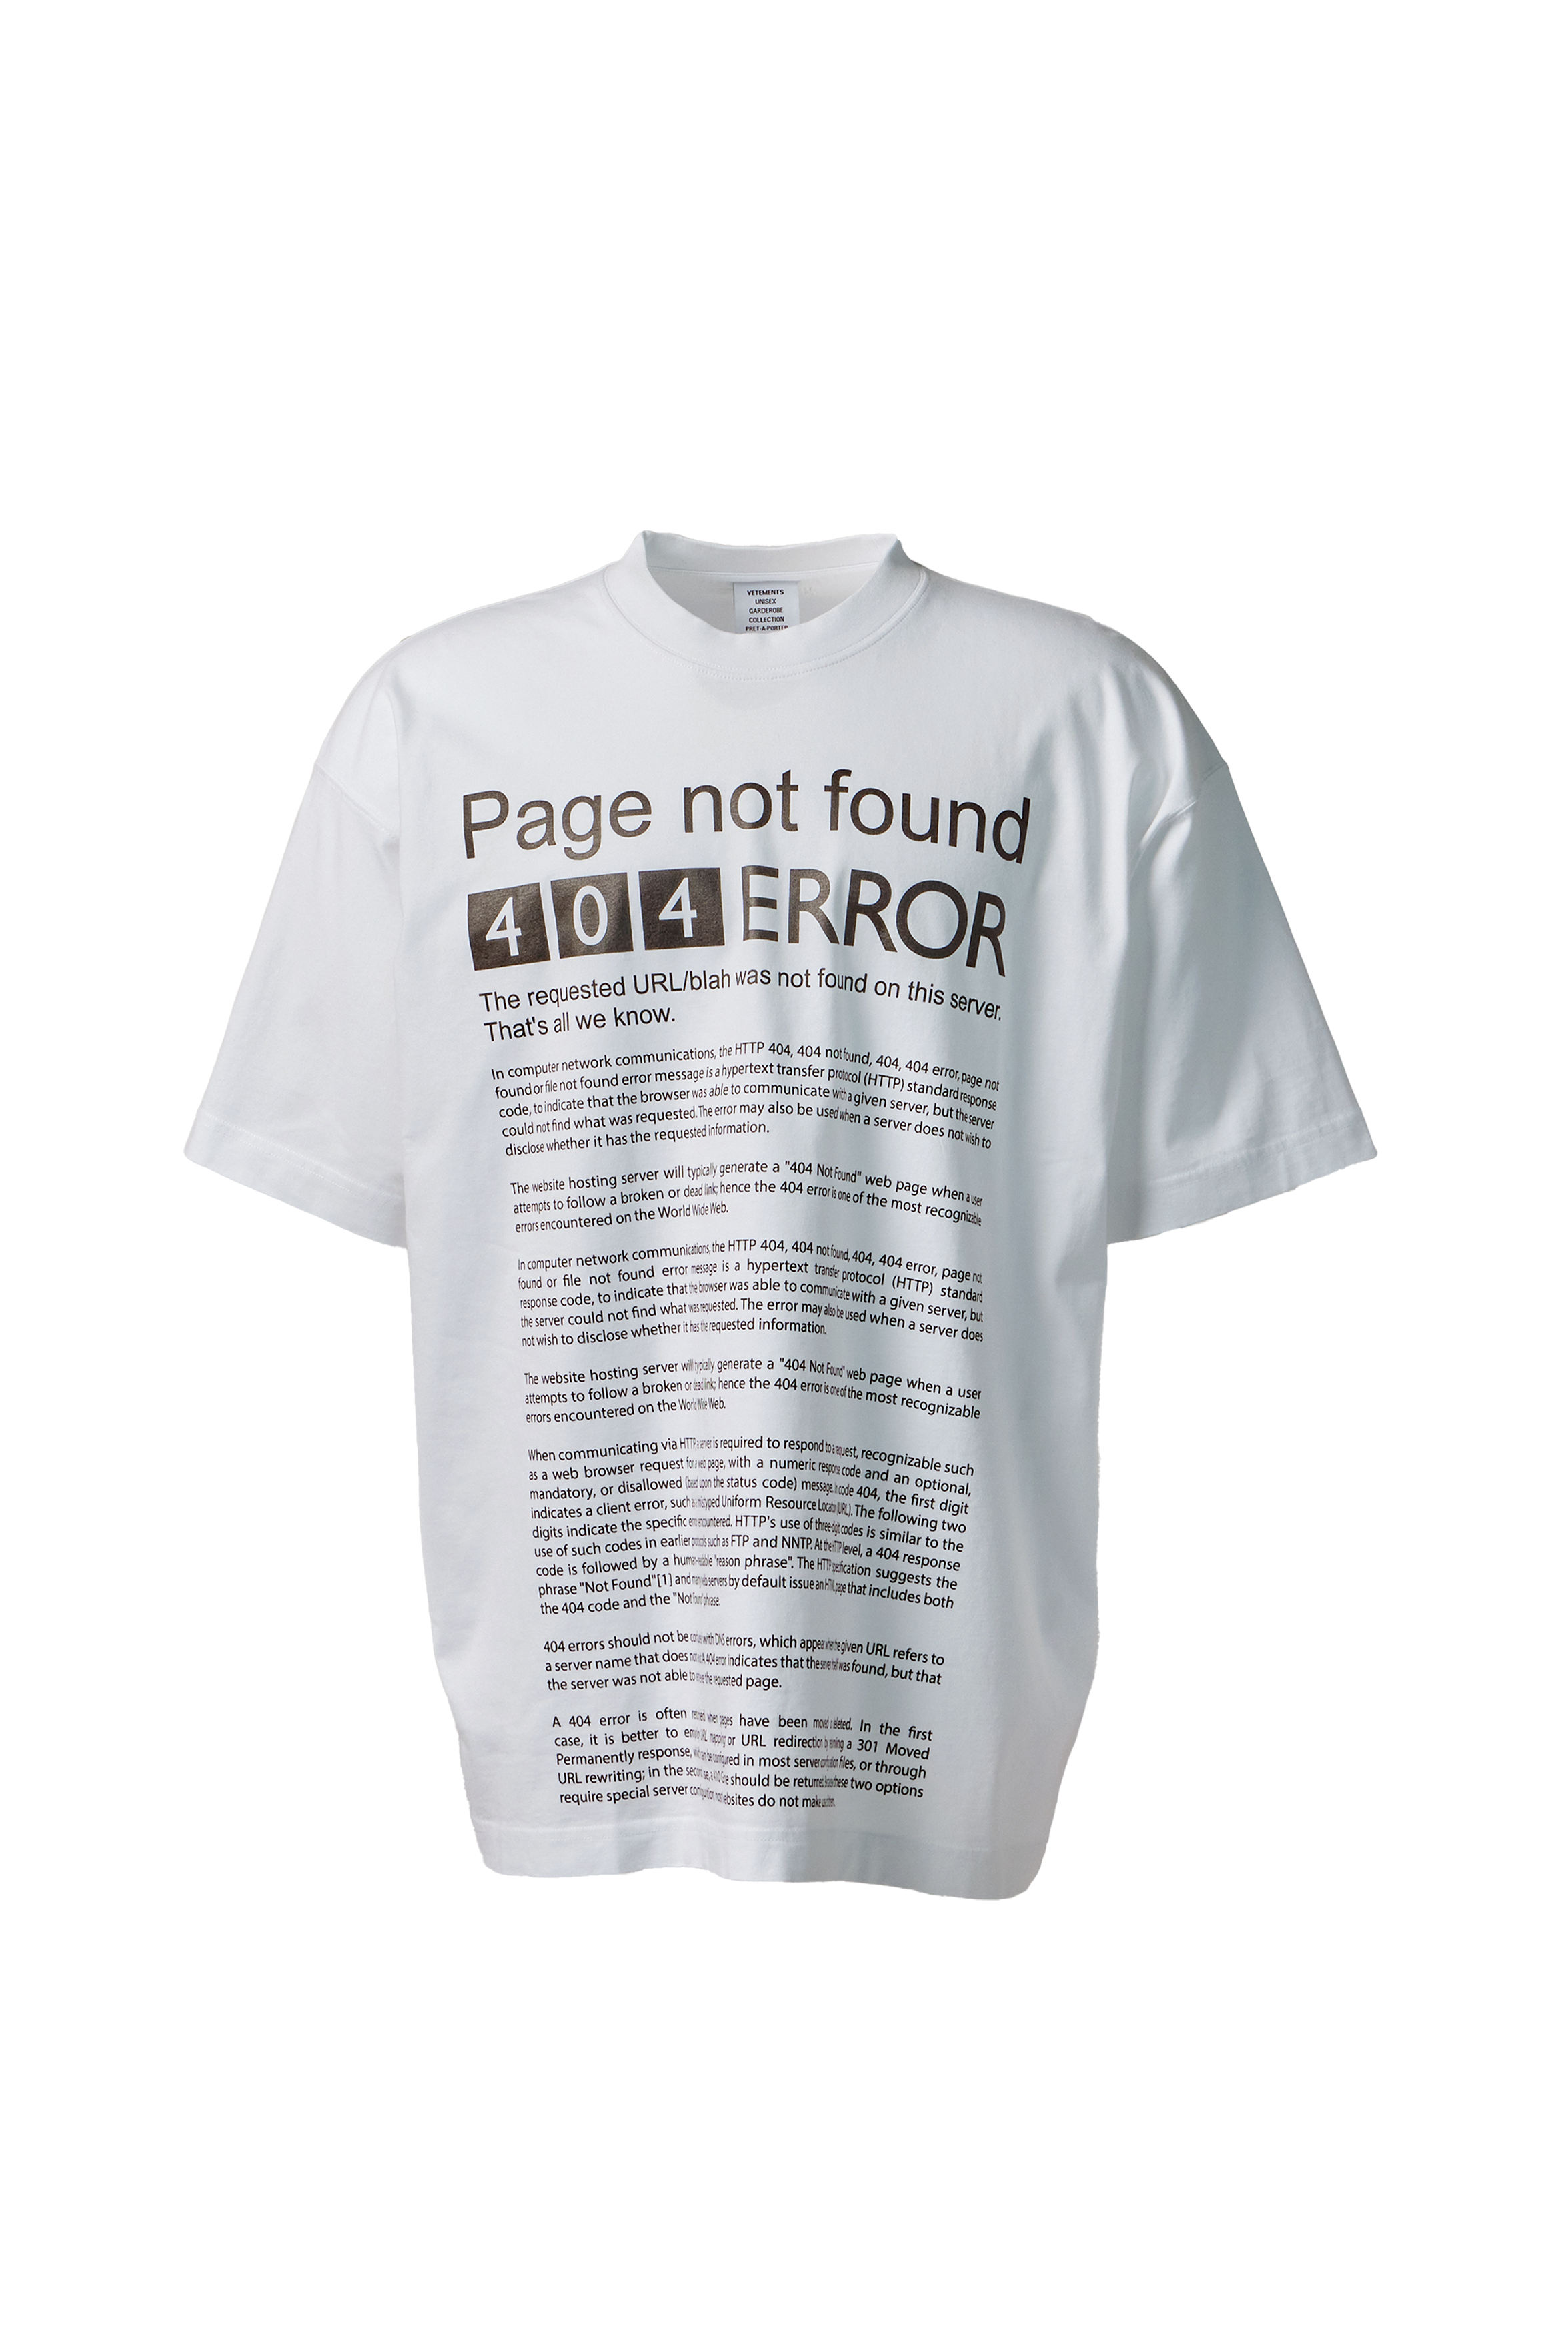 VETEMENTS - Page Not Found T-Shirt product image